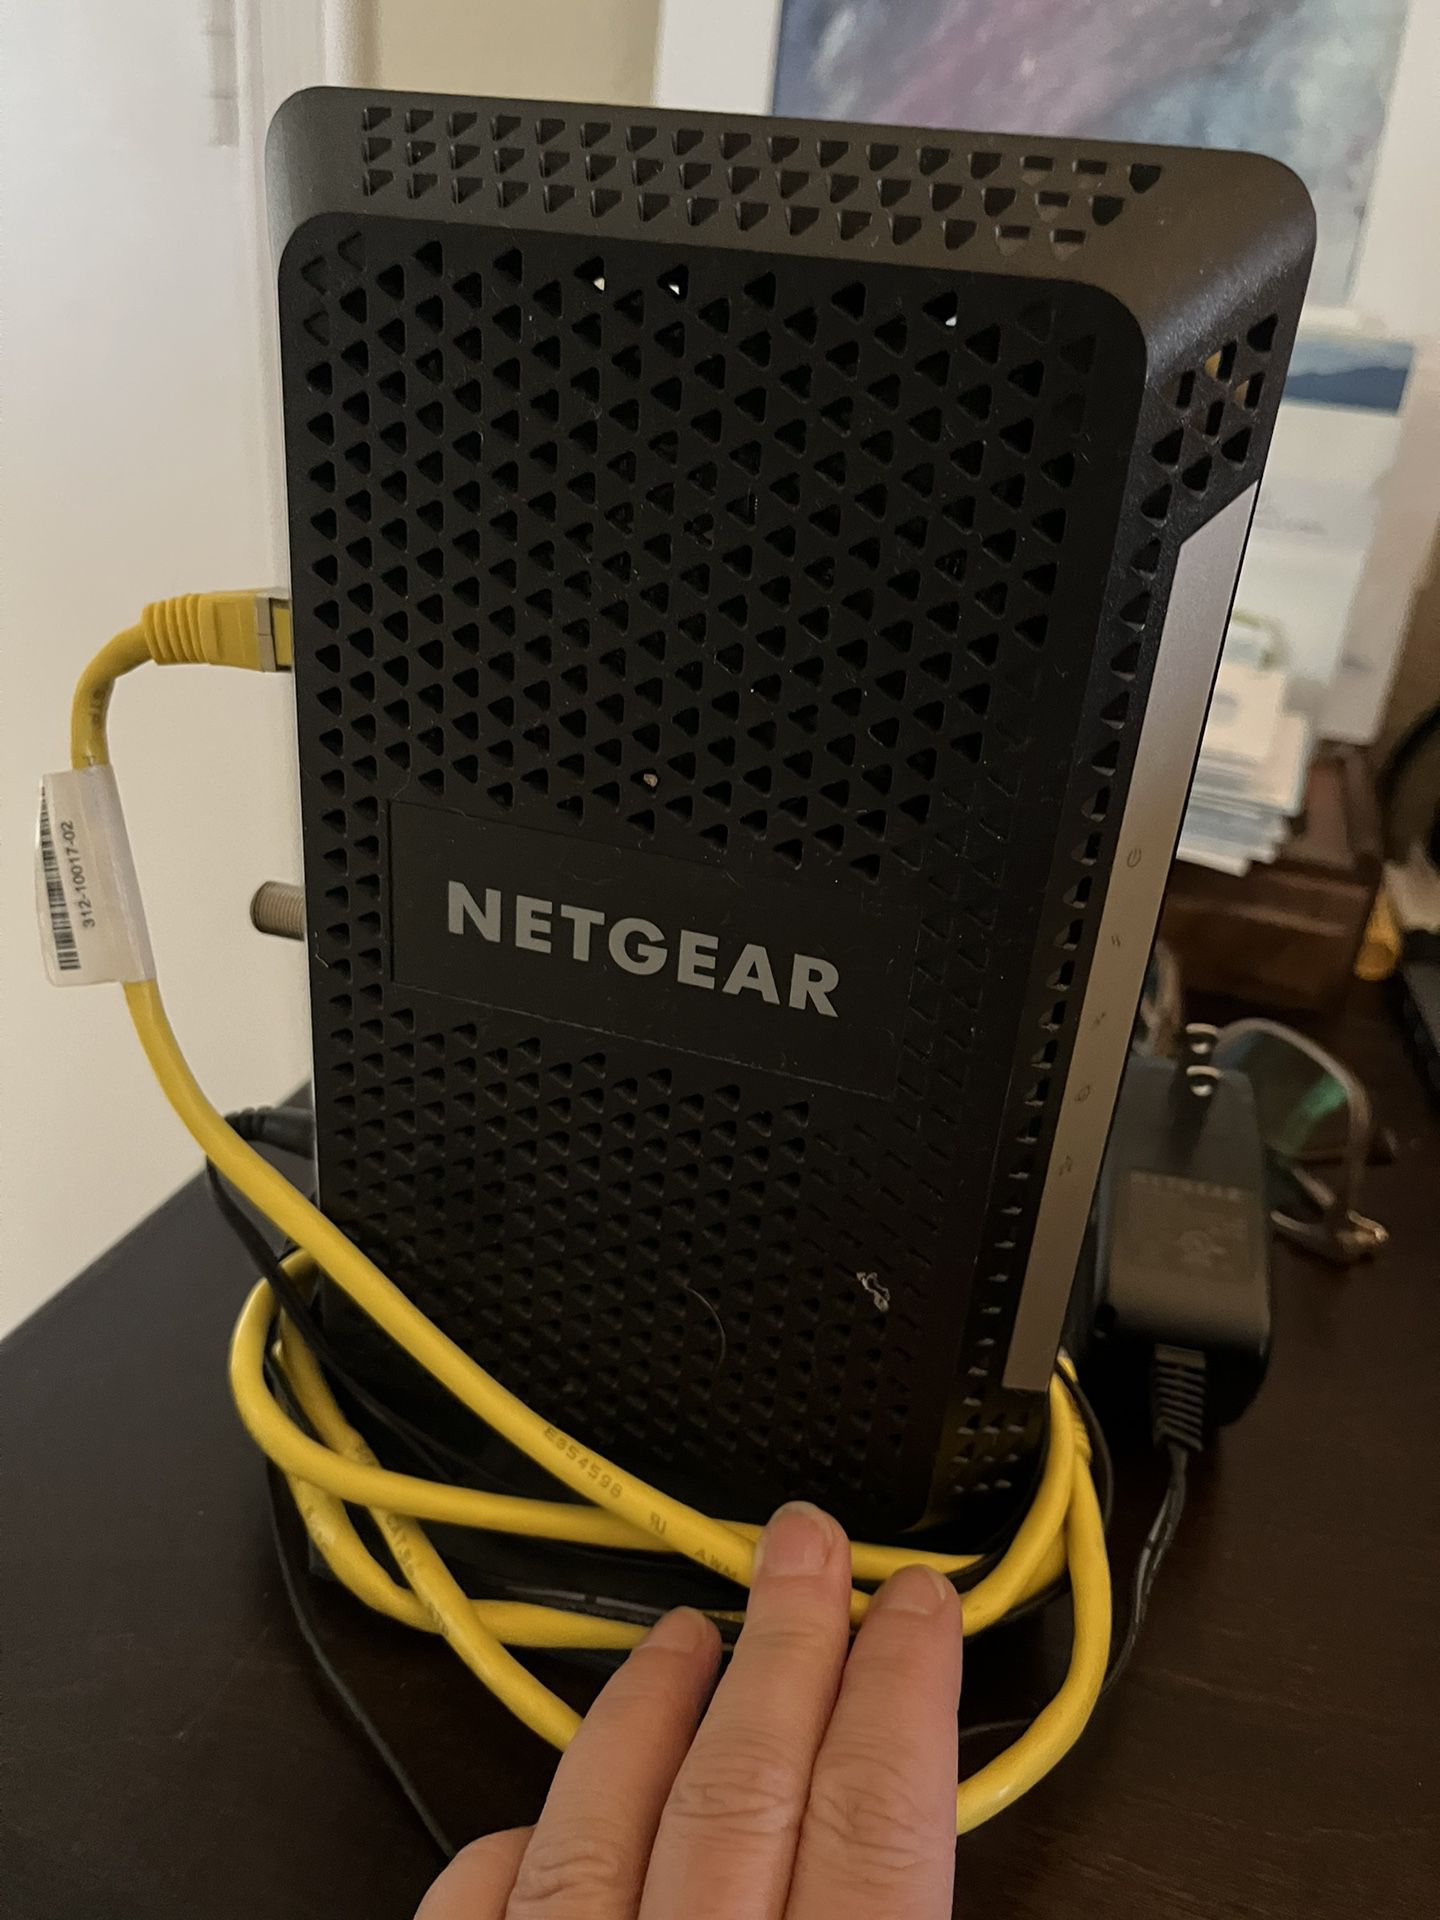 Net gear Modem And Router 